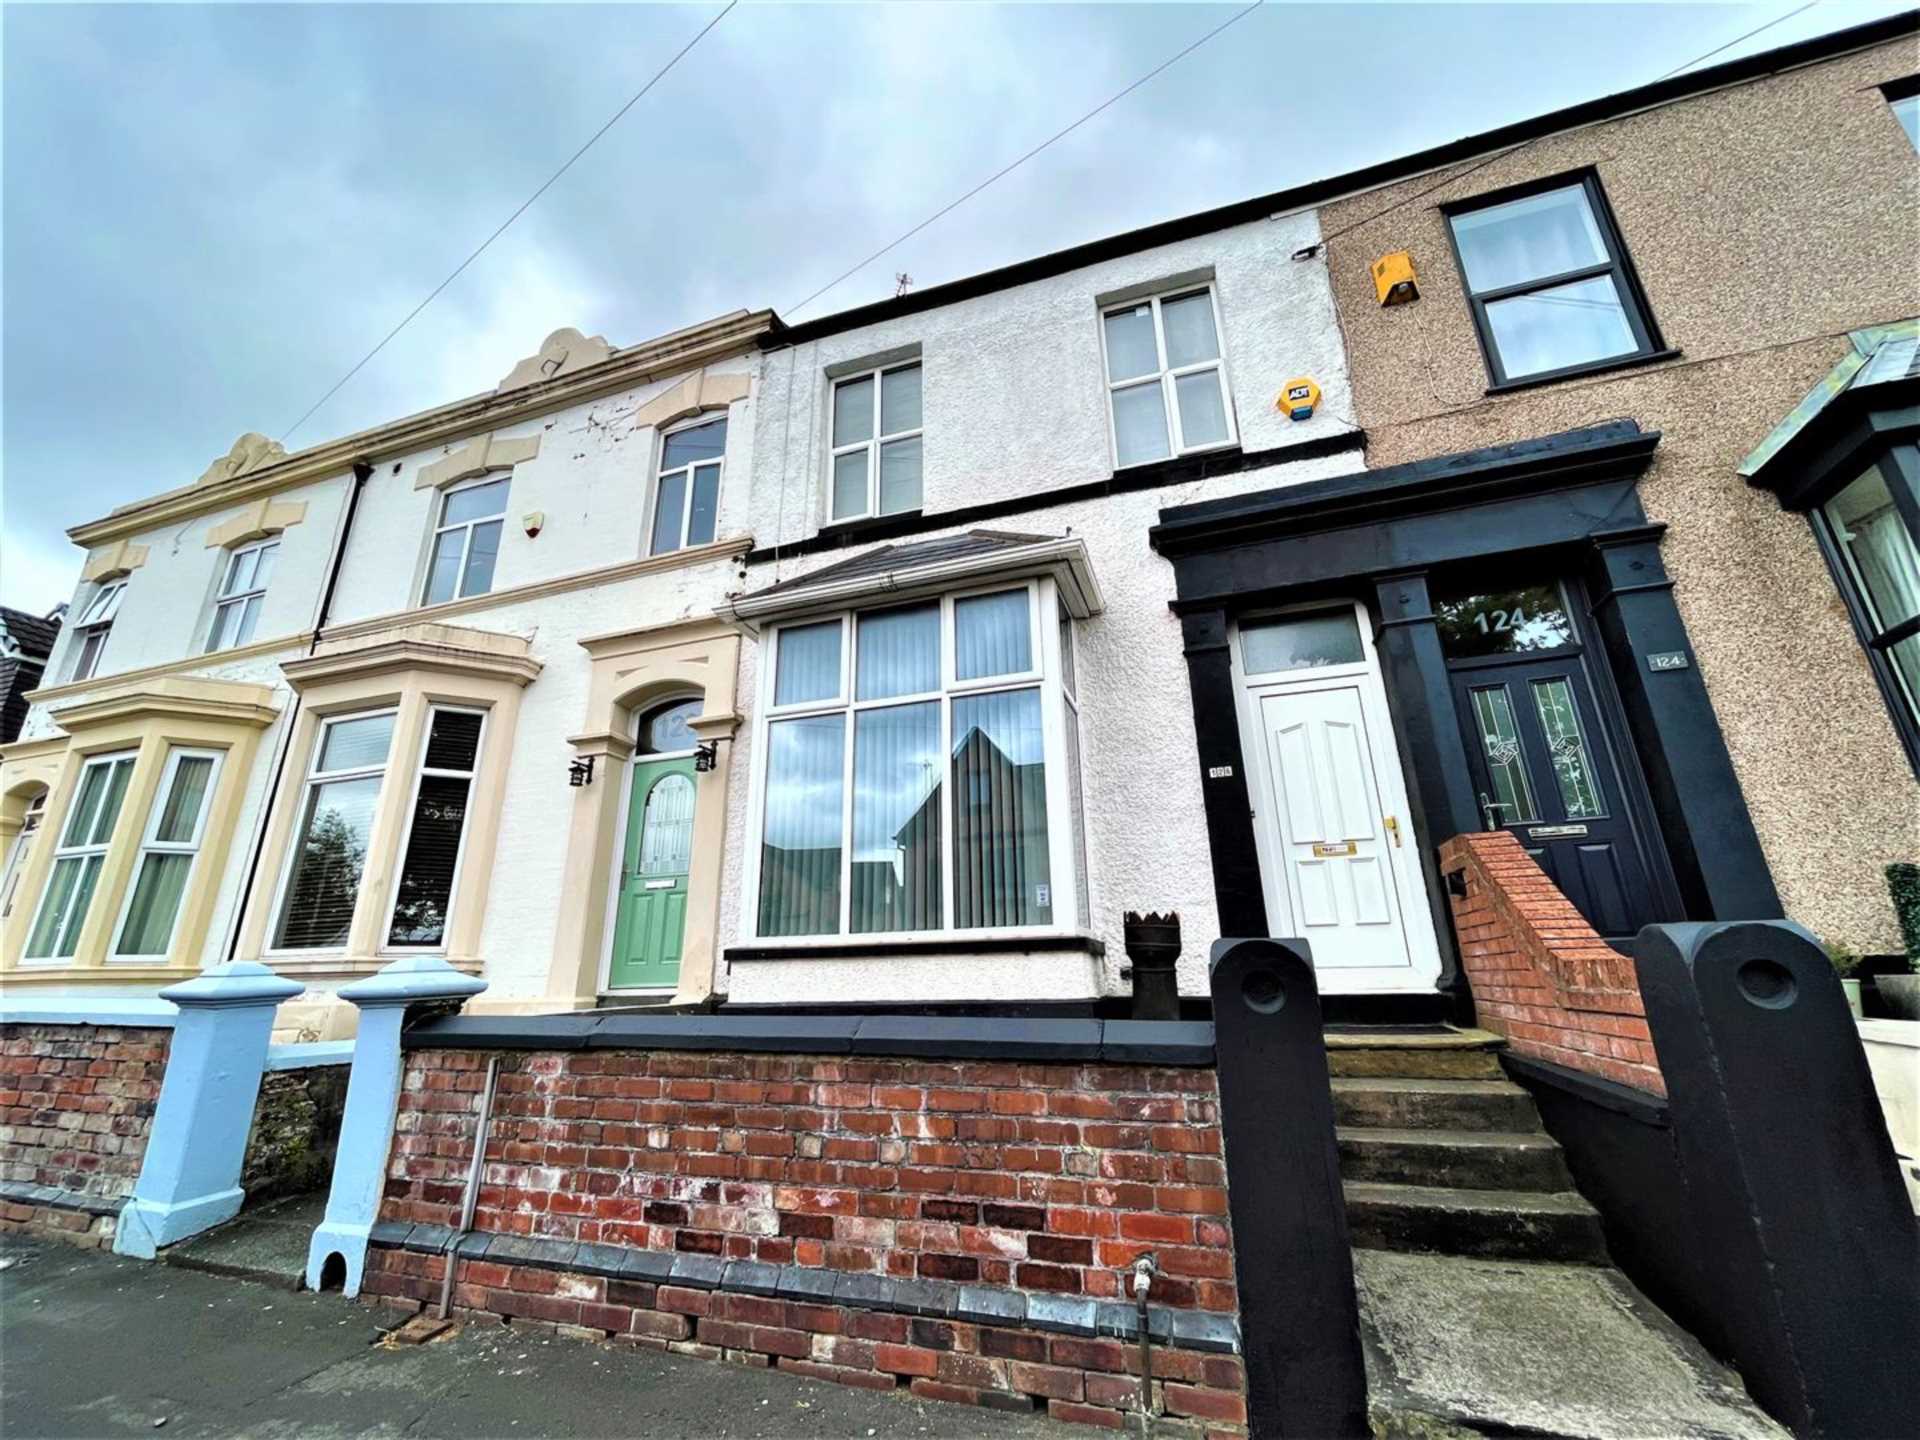 3 bed Mid Terraced House for rent in St Helens. From Home Estate Agents Ltd - Tameside